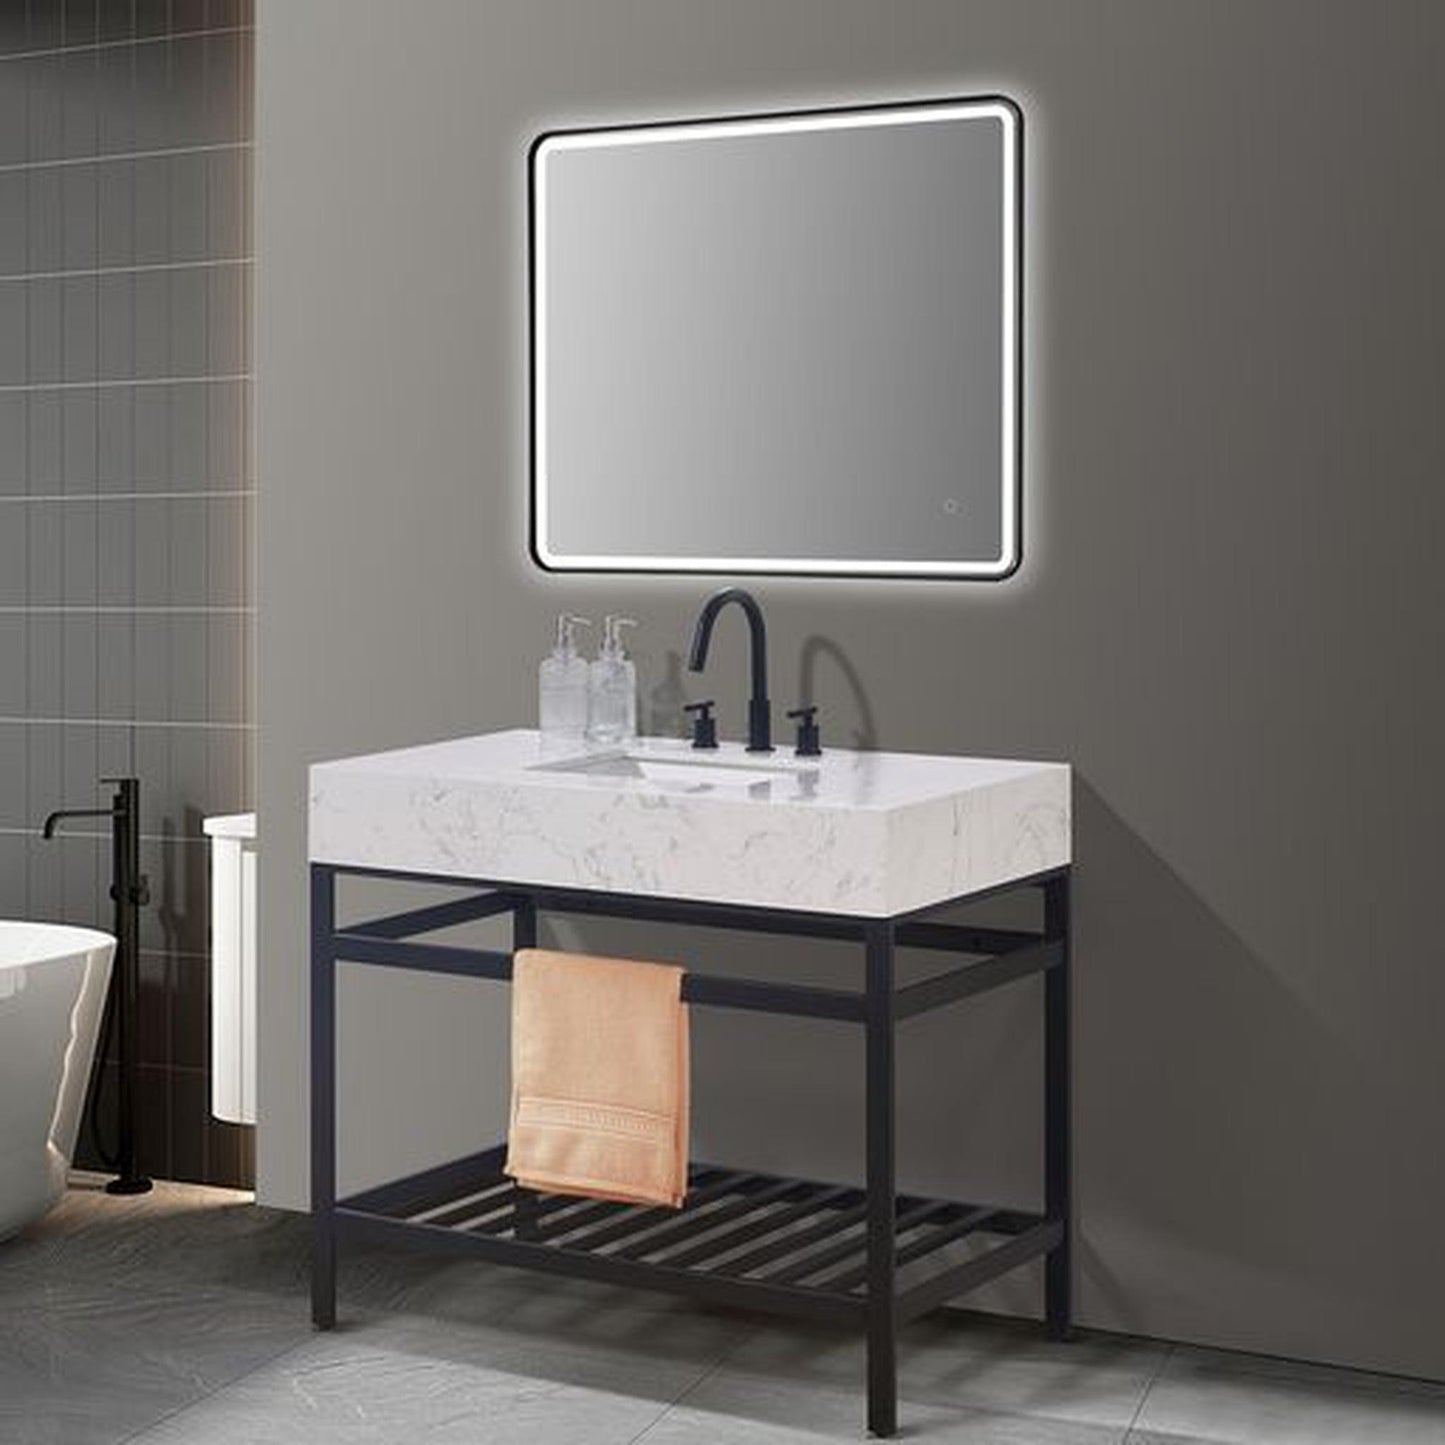 Altair Merano 42" Matte Black Single Stainless Steel Bathroom Vanity Set Console With Mirror, Aosta White Stone Top, Single Rectangular Undermount Ceramic Sink, and Safety Overflow Hole